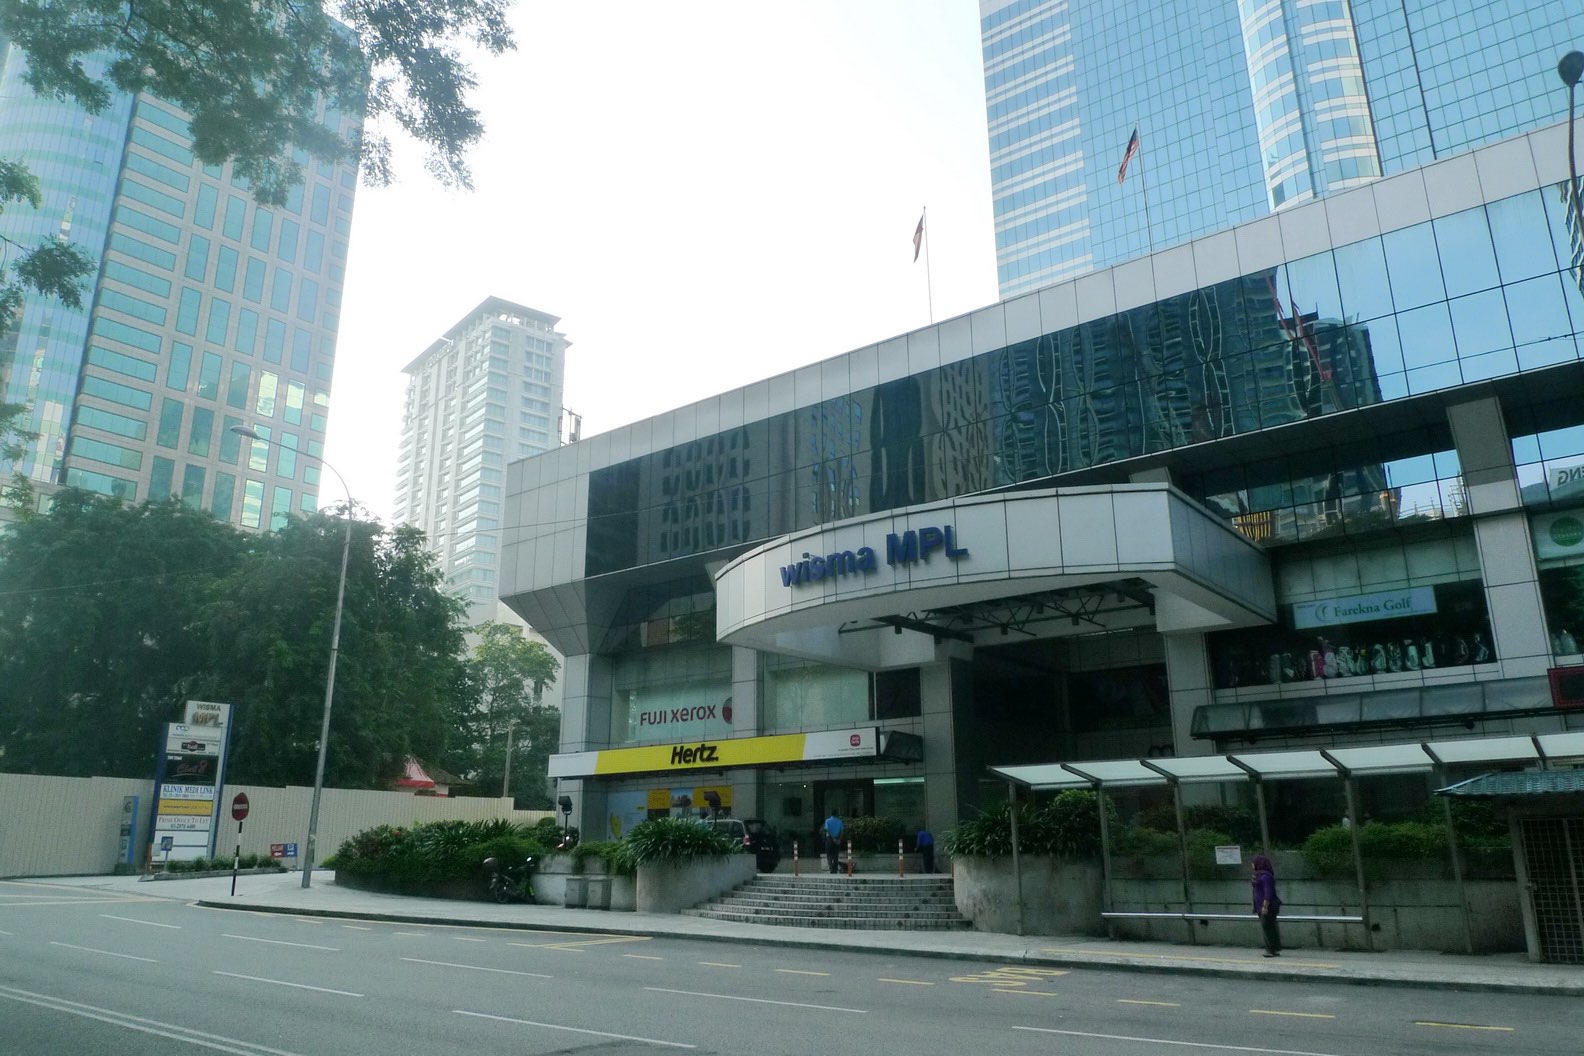 Police report that the raid occurred at an entertainment outlet on the first floor of Wisma MPL via Property Guru